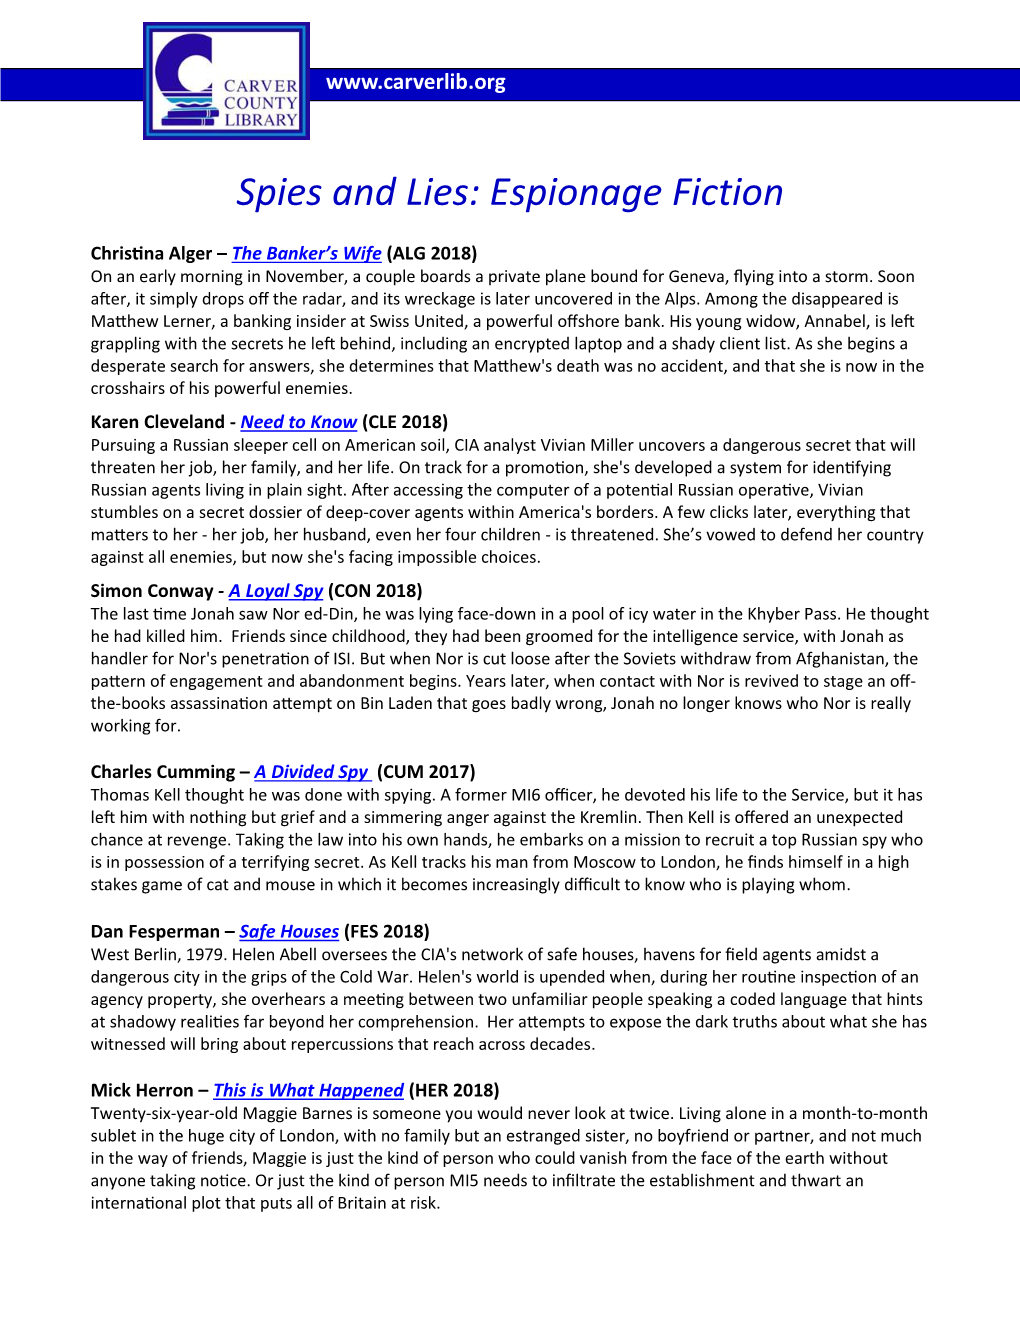 Spies and Lies: Espionage Fiction